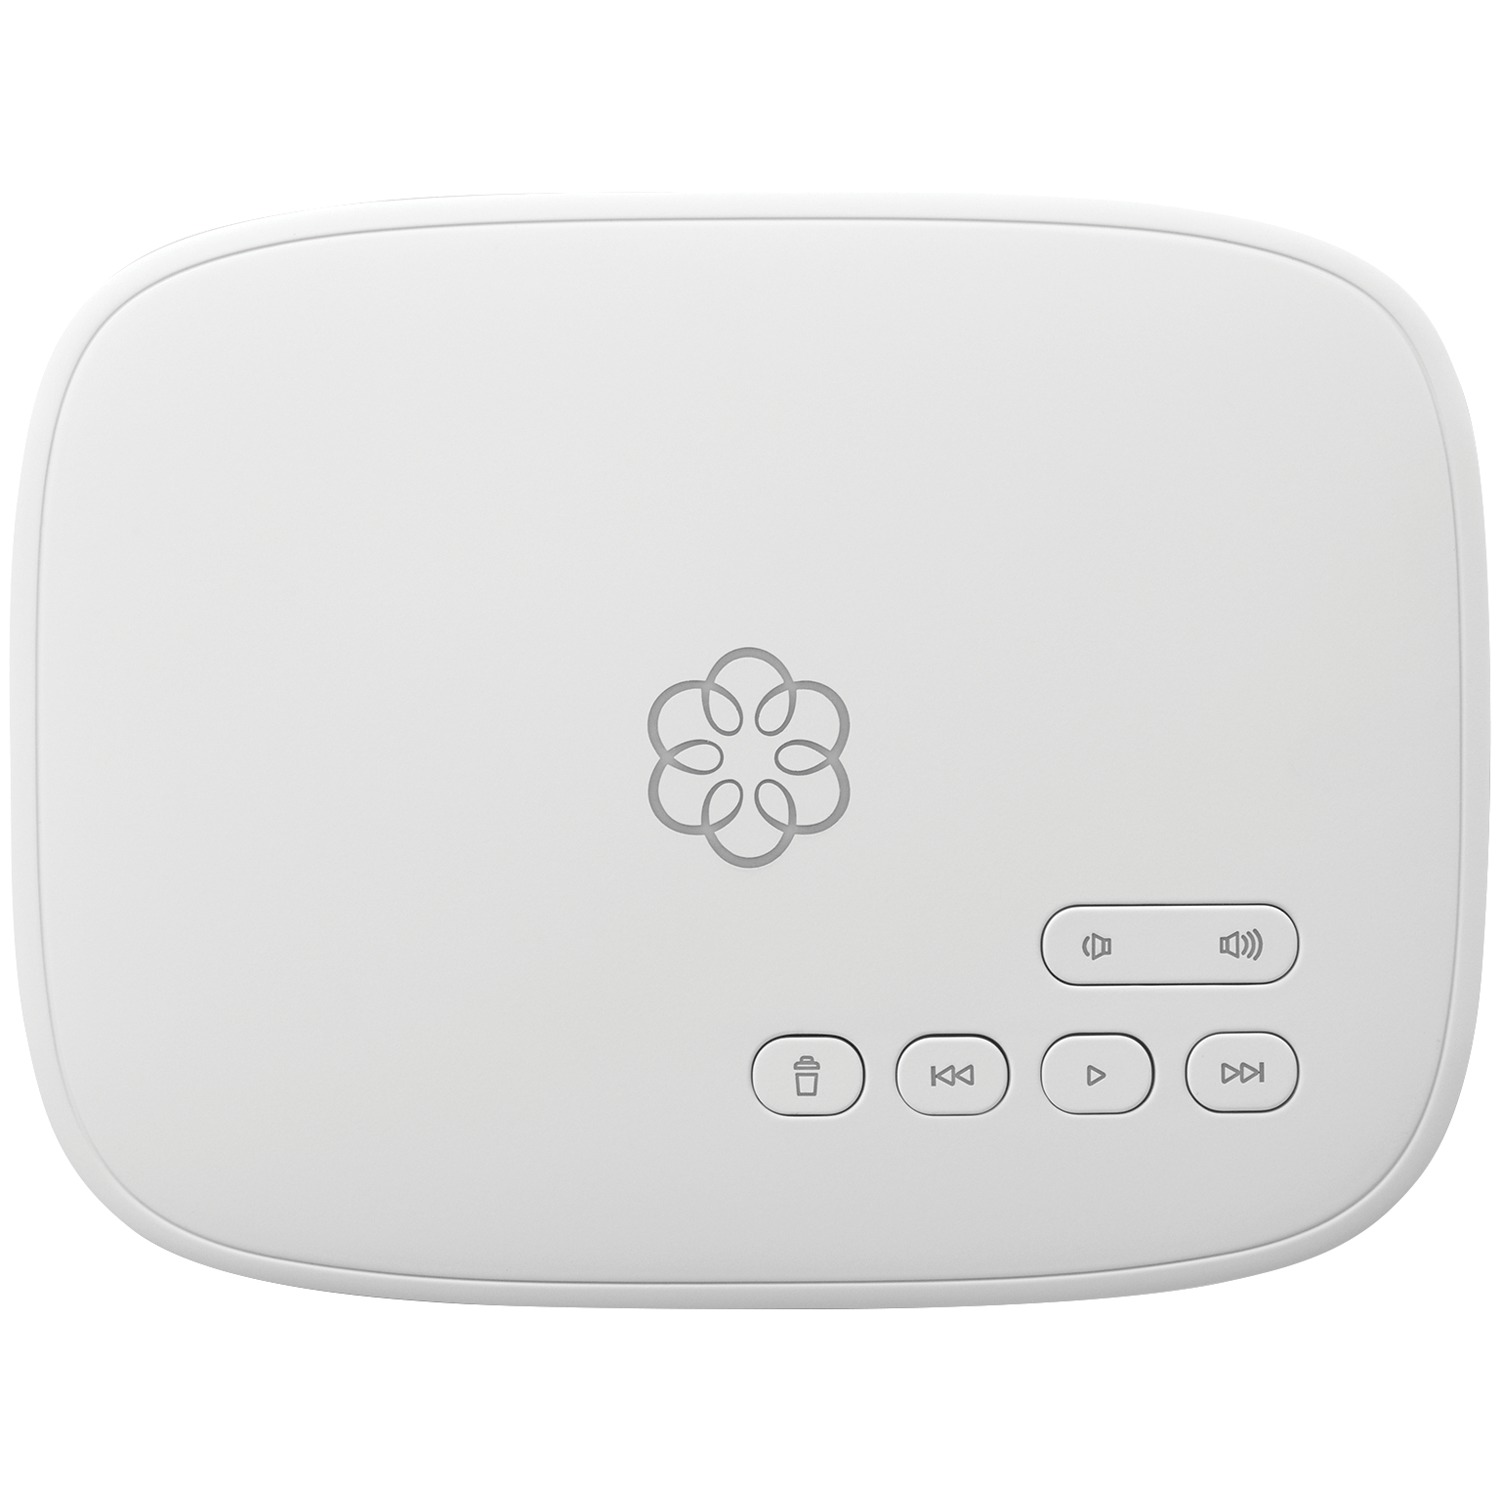 Ooma Phone Genie LTE, Alternative Home Phone Service with No Internet Connection Required - image 4 of 4